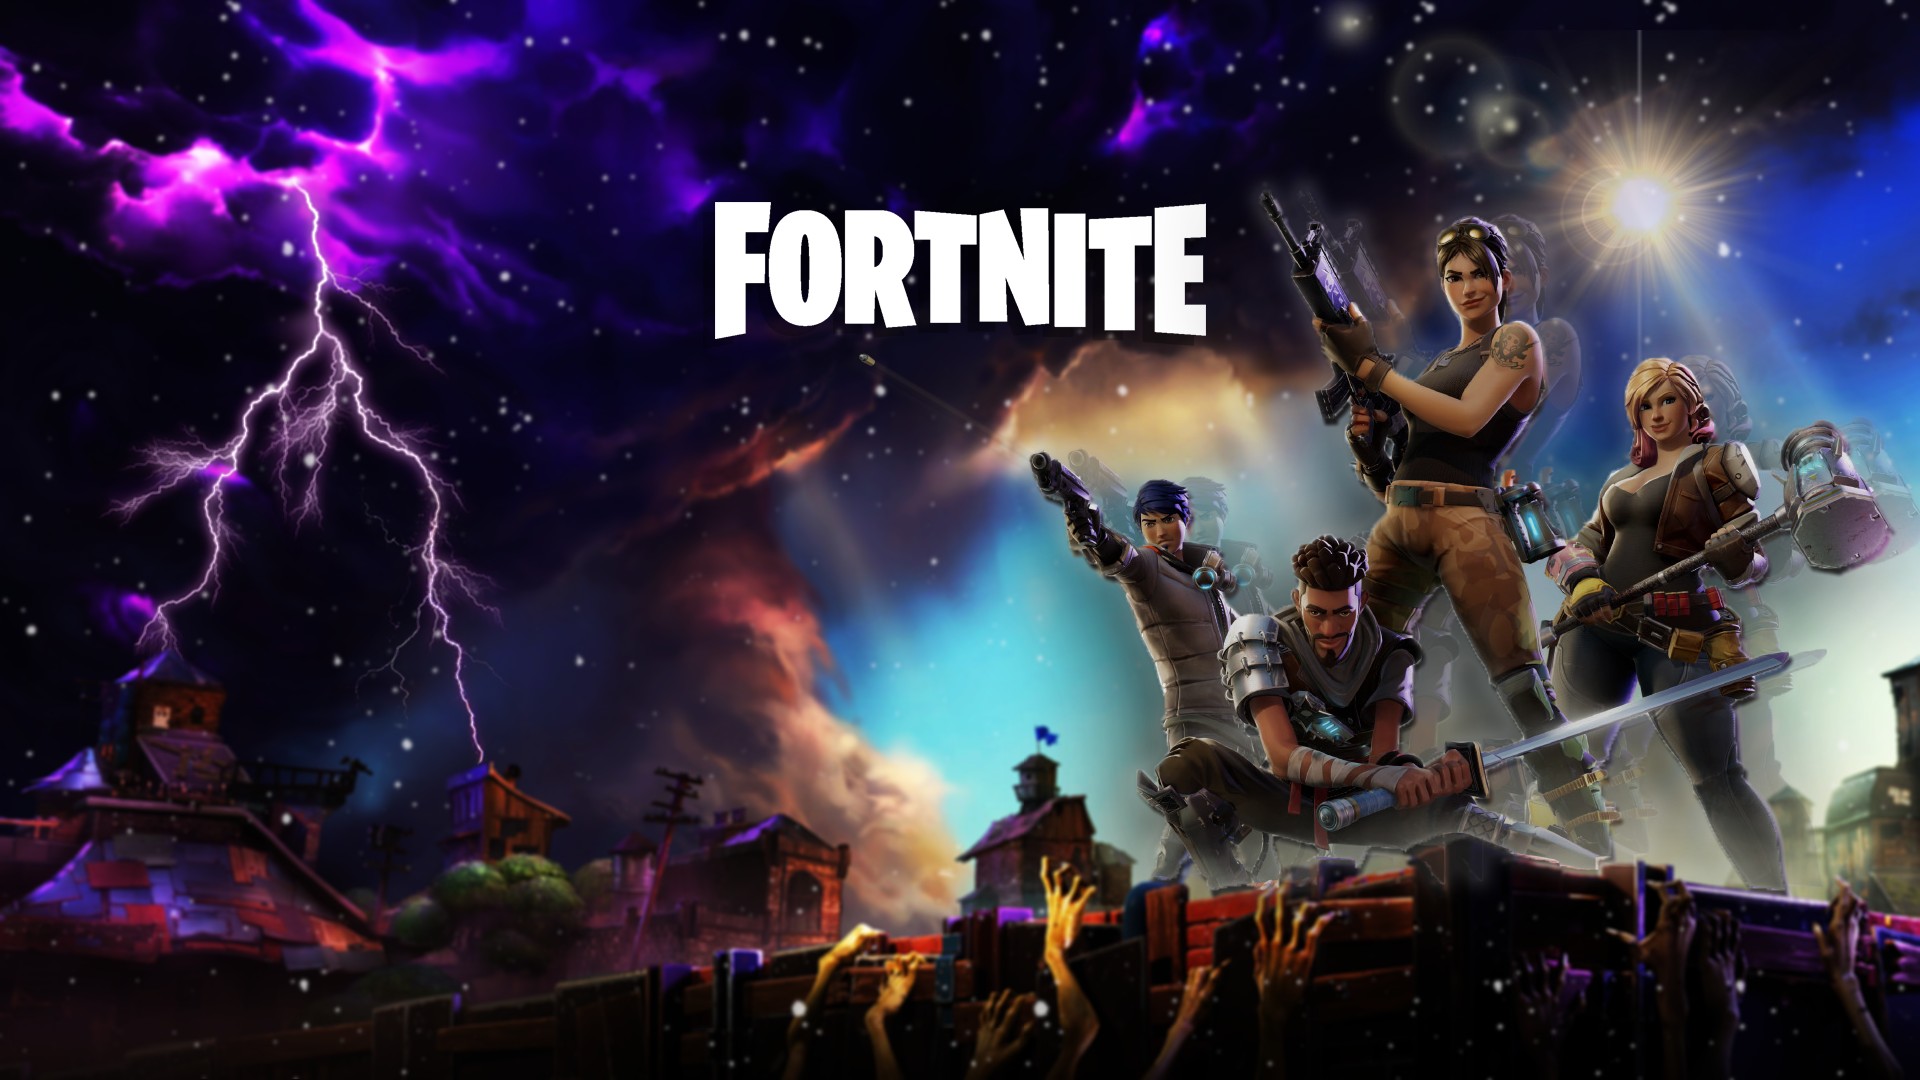 Wallpapers Computer Fortnite With high-resolution 1920X1080 pixel. You can use this wallpaper for your Desktop Computer Backgrounds, Mac Wallpapers, Android Lock screen or iPhone Screensavers and another smartphone device